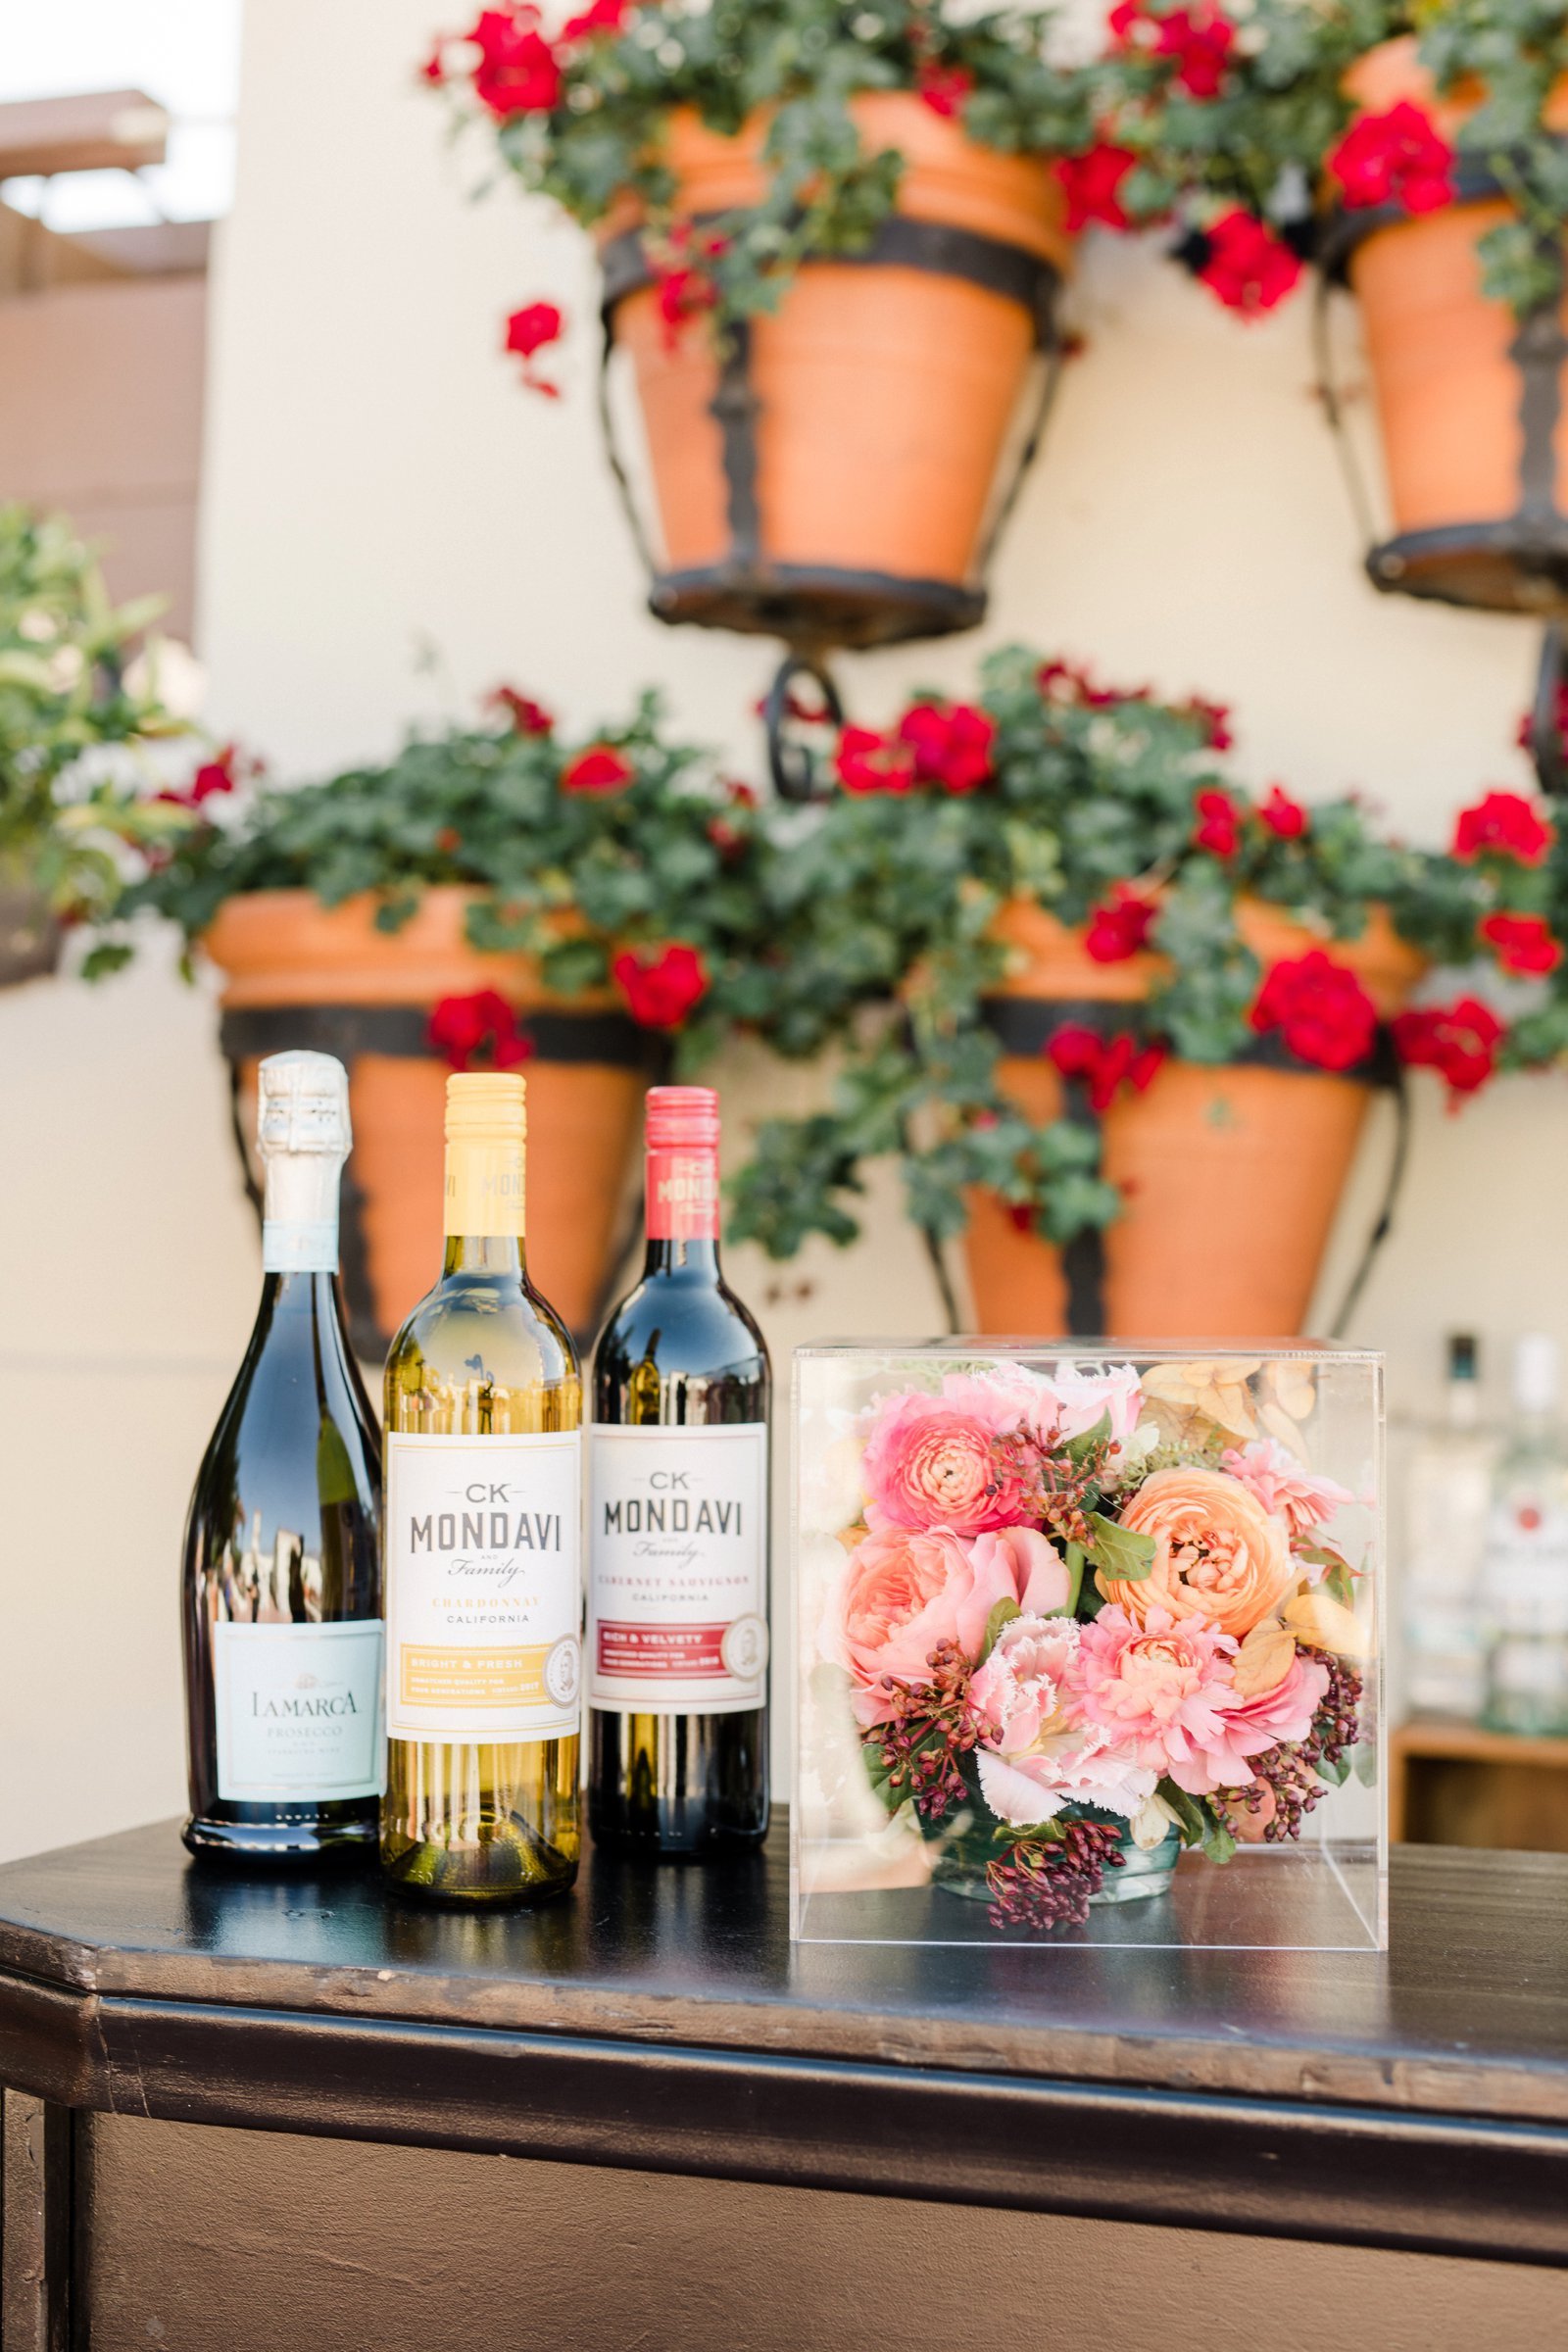 www.santabarbarawedding.com | Anna Delores Photography | Kimpton Canary Hotel | Onyx + Redwood | Idlewild Floral | Wine Refreshments and Florals